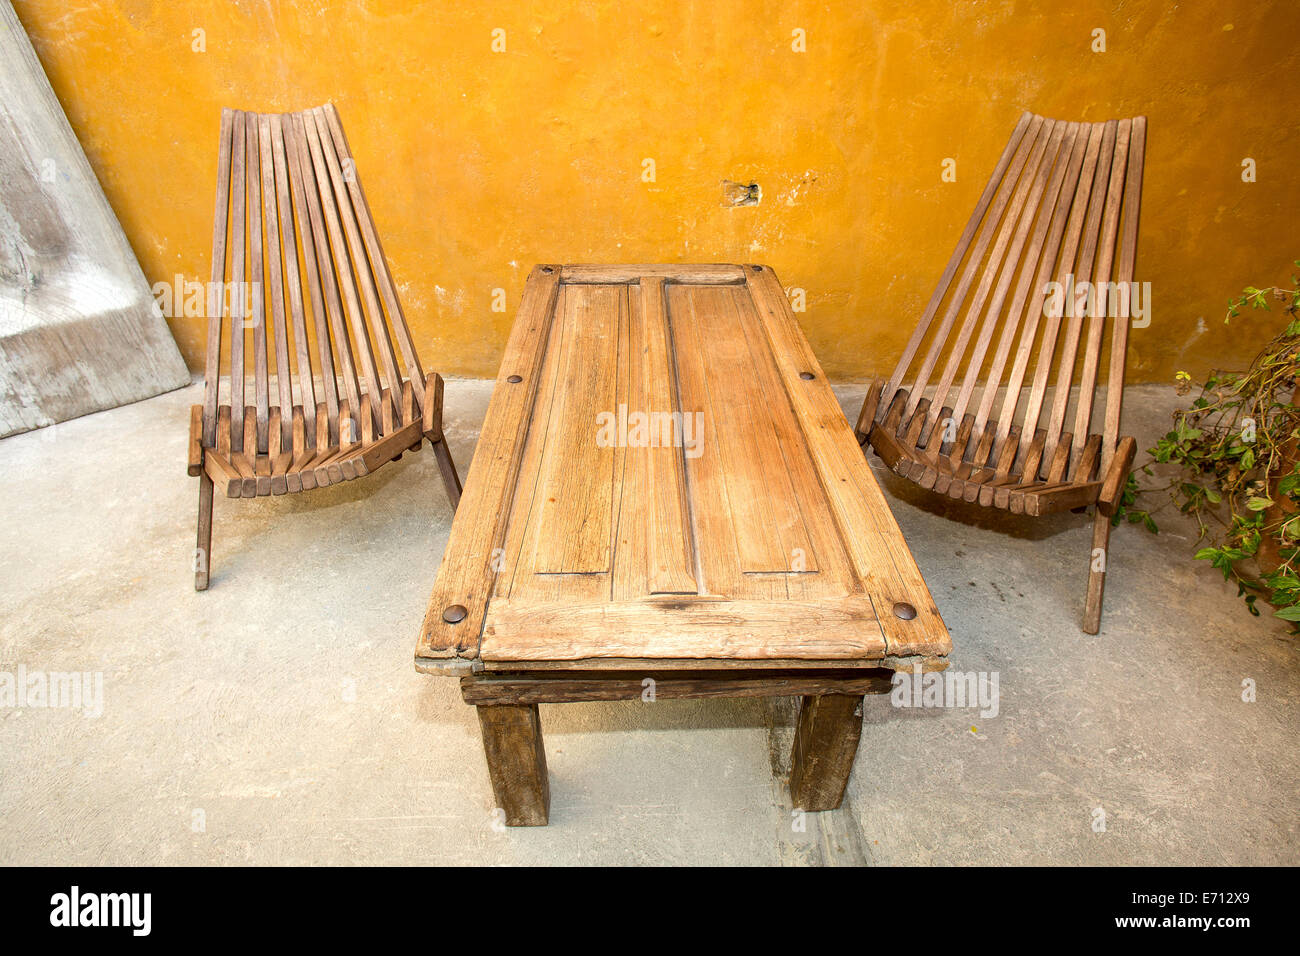 Furniture Made From Reclaimed Wood Stock Photo 73168321 Alamy